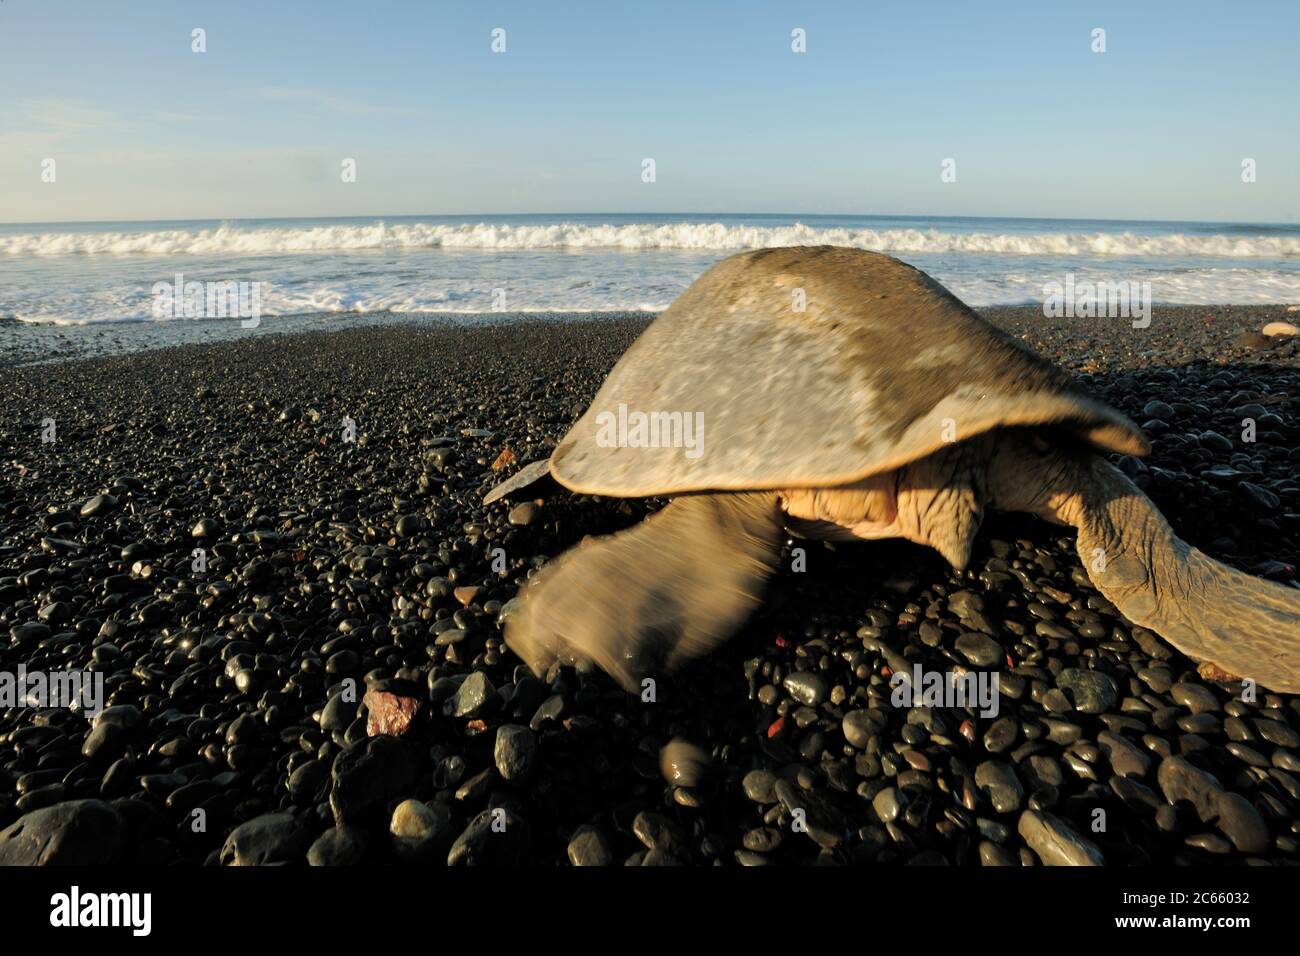 Looking at a mature sea turtle as this olive ridley (Lepidochelys olivacea) one can easily tell the gender: a female has a short tail, as seen here, while a male has a muscular, long tail clearly protruding past the edge of the carapace. Stock Photo